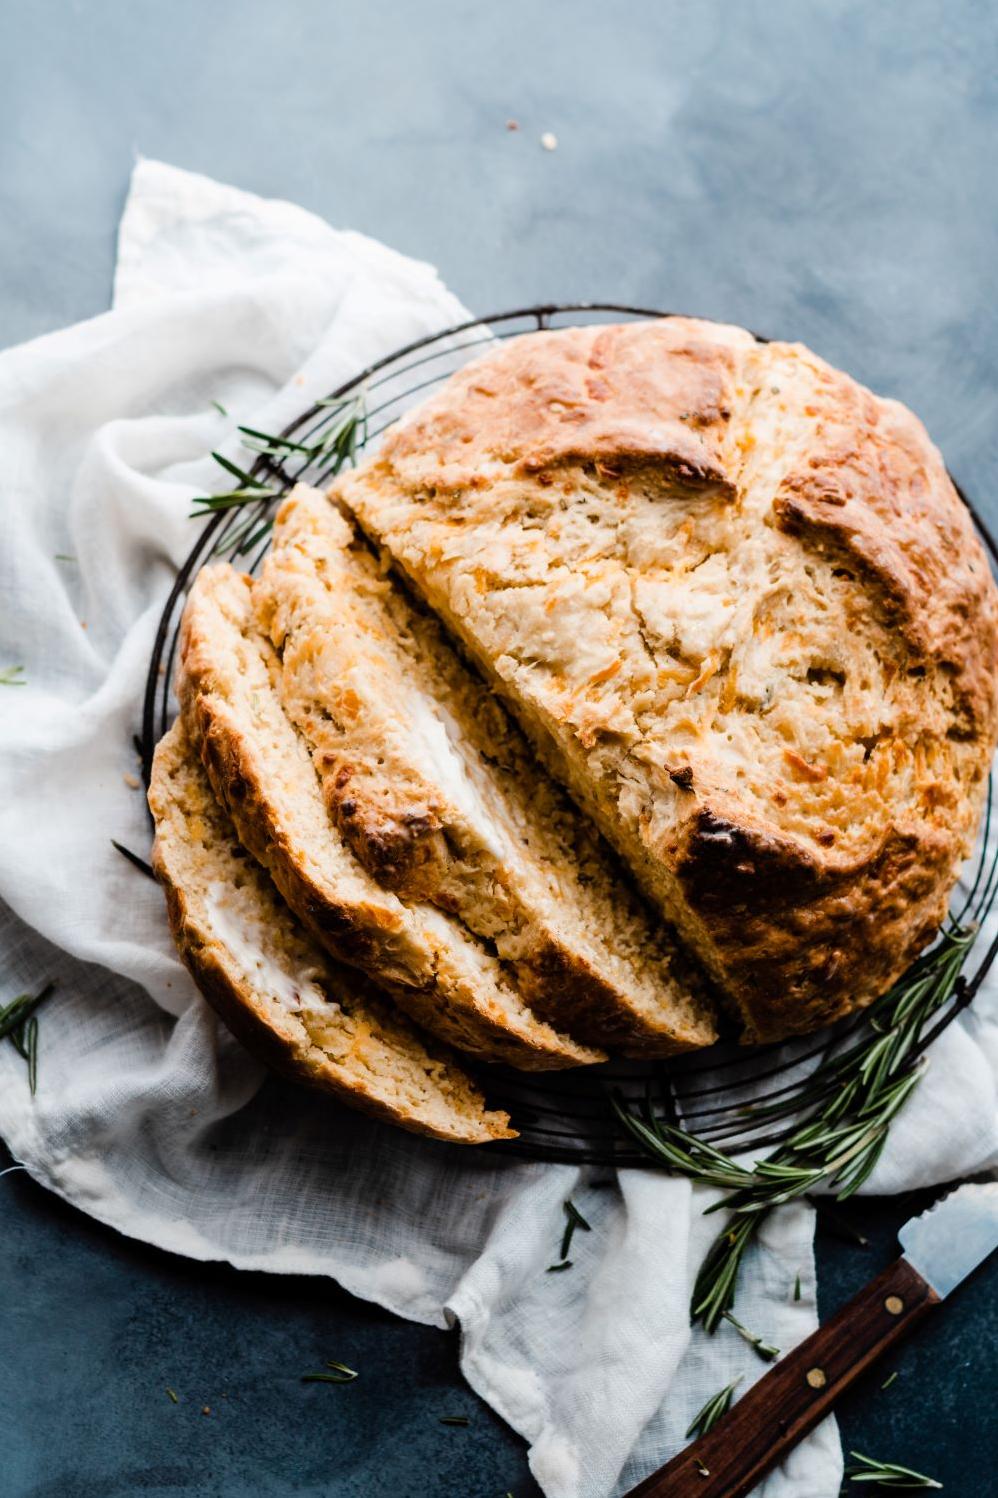  Can you resist a slice of this homemade, crispy-on-the-outside twisted soda bread?